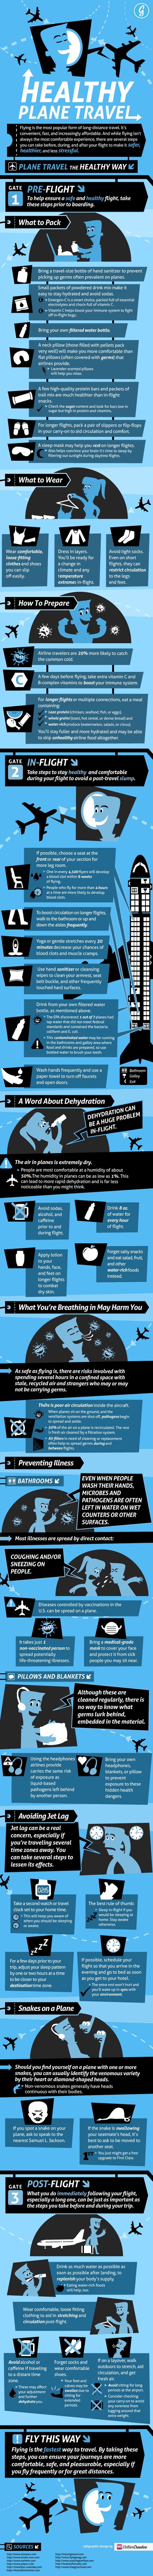 07 Plane-Travel-the-Healthy-Way-Infographic1_1